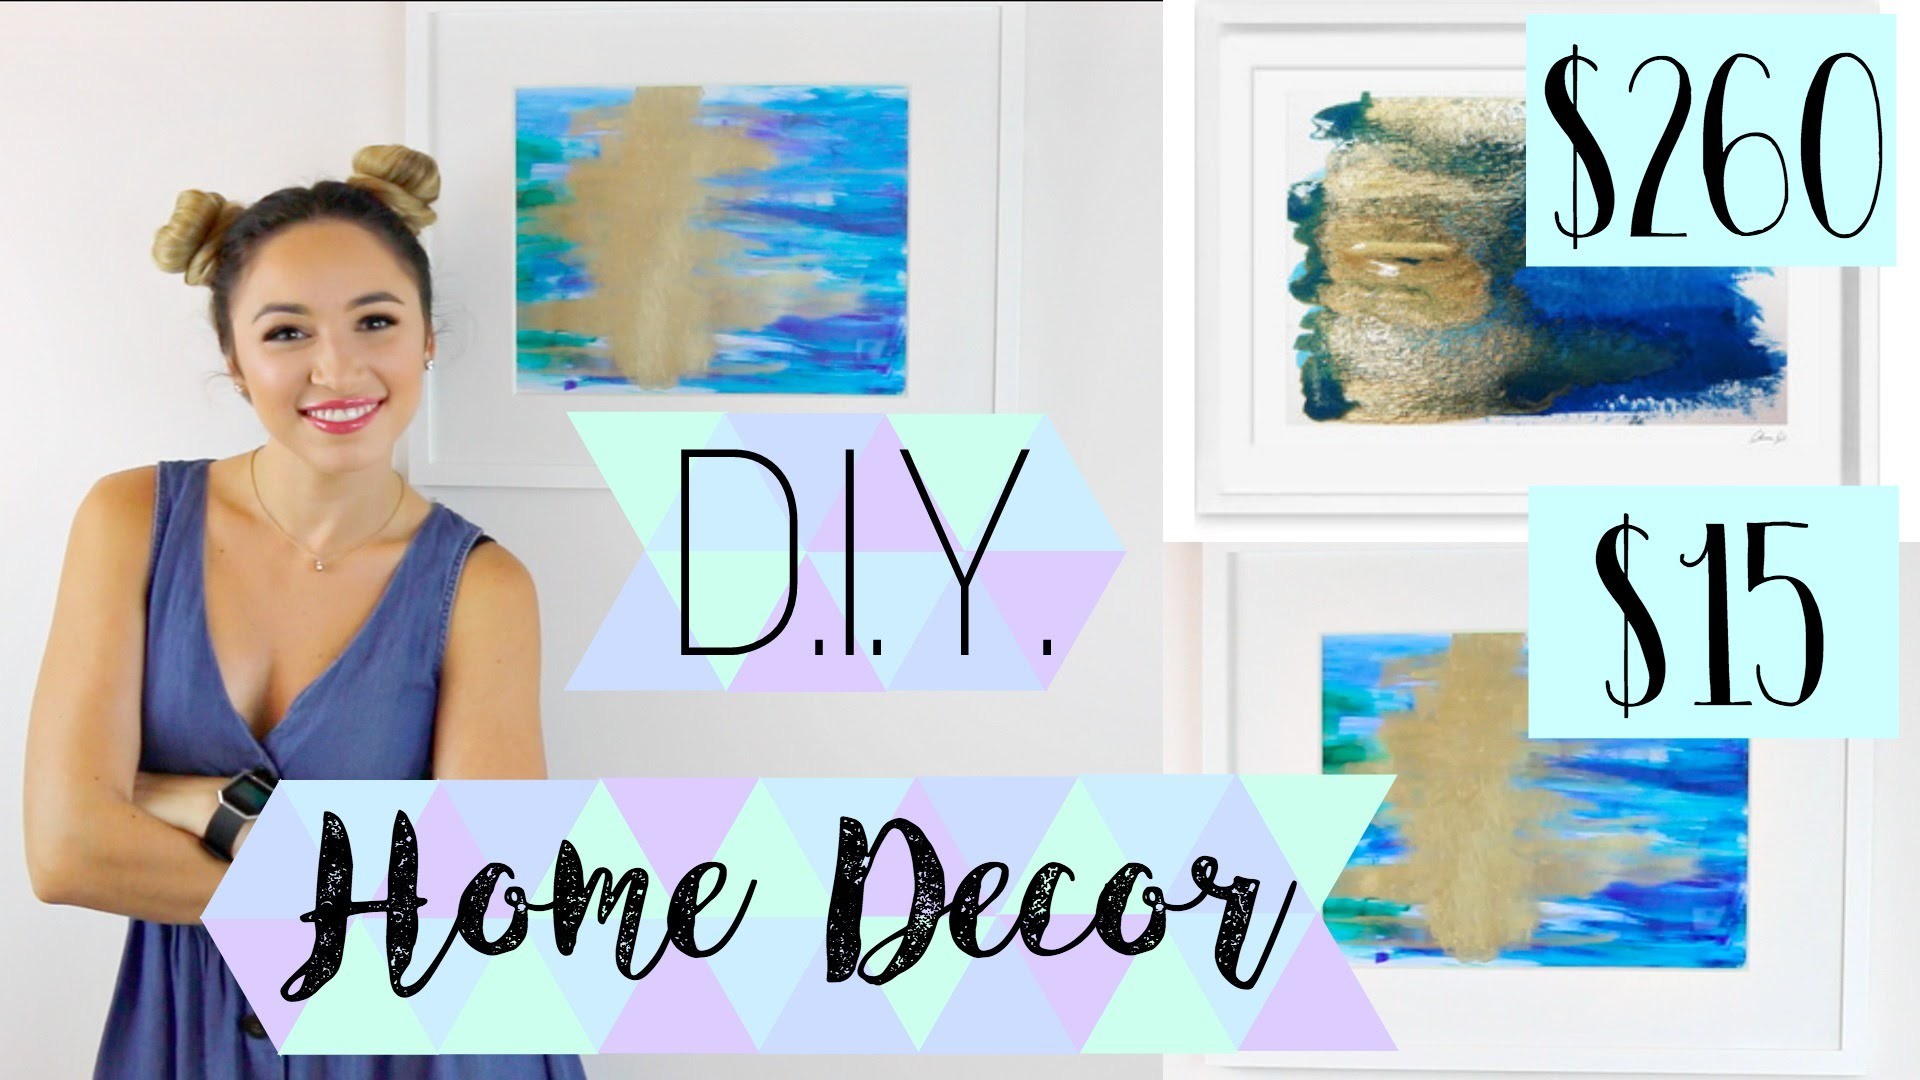 D.I.Y. HOME DECOR | ABSTRACT PAINTING WALL ART | ALEXANDRA BEUTER